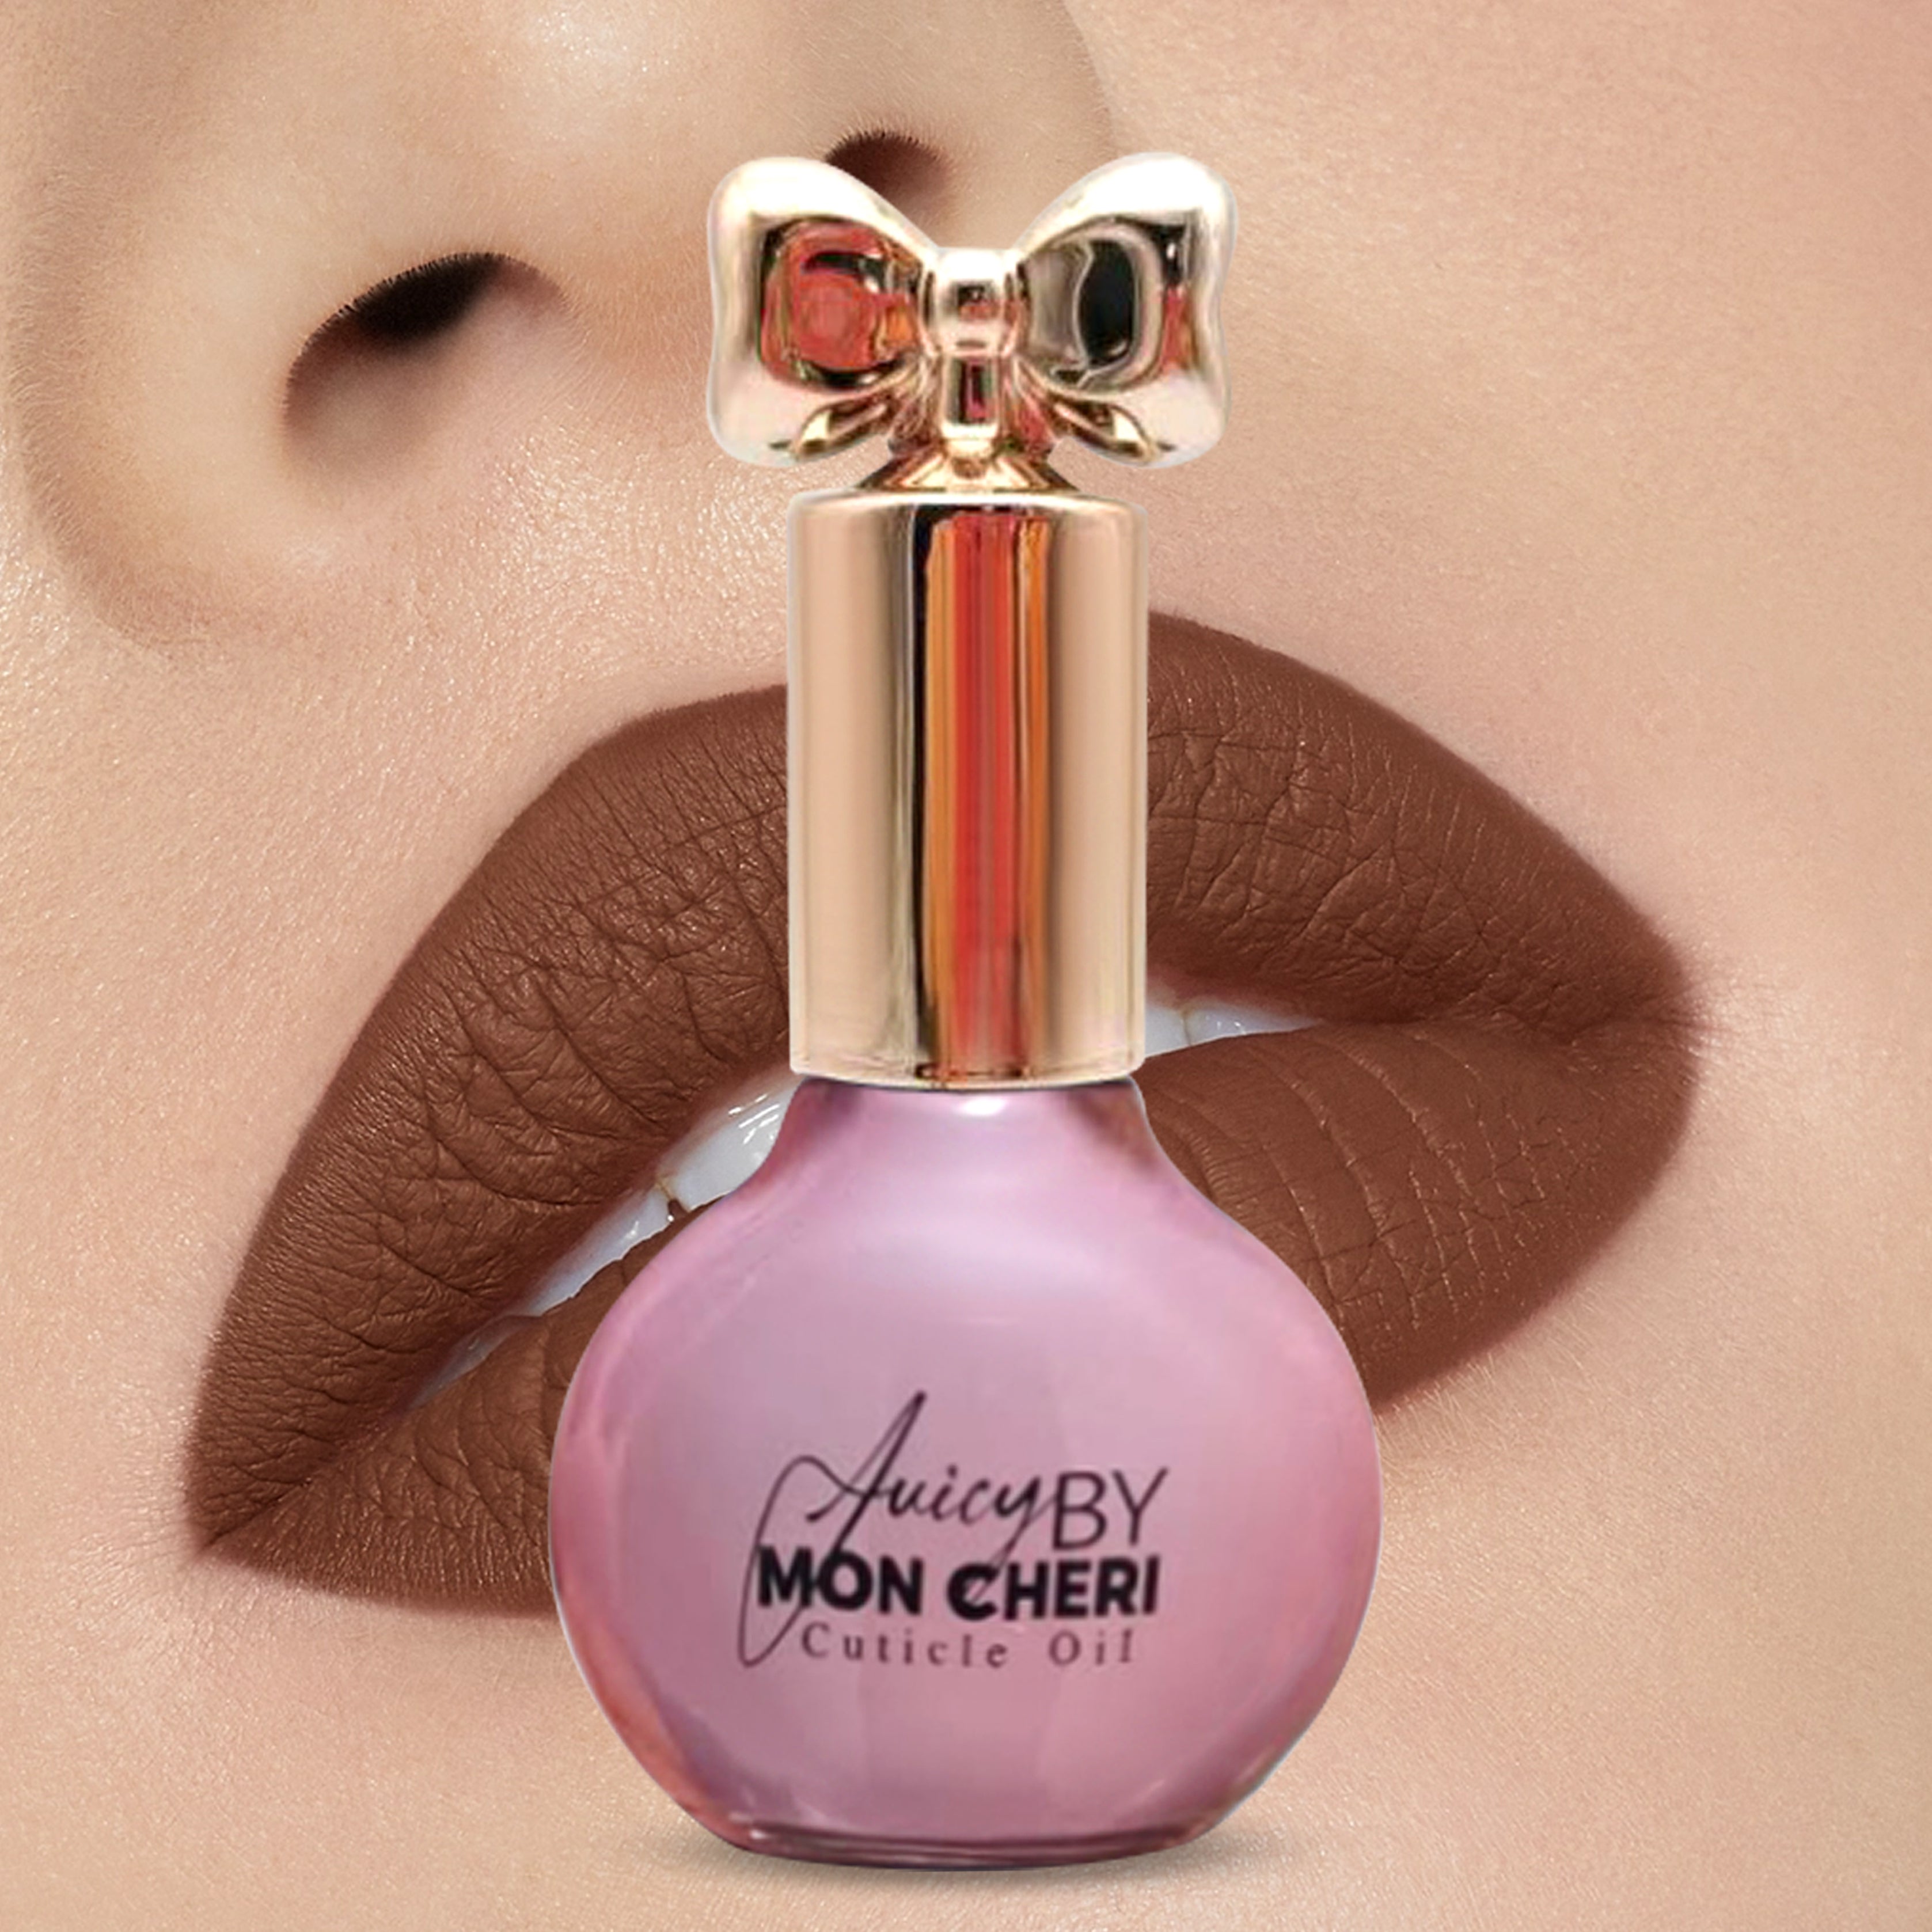 Attract and Entice with Allure Cuticle Oil by Juicy by Mon Cheri (Pheromone scent)